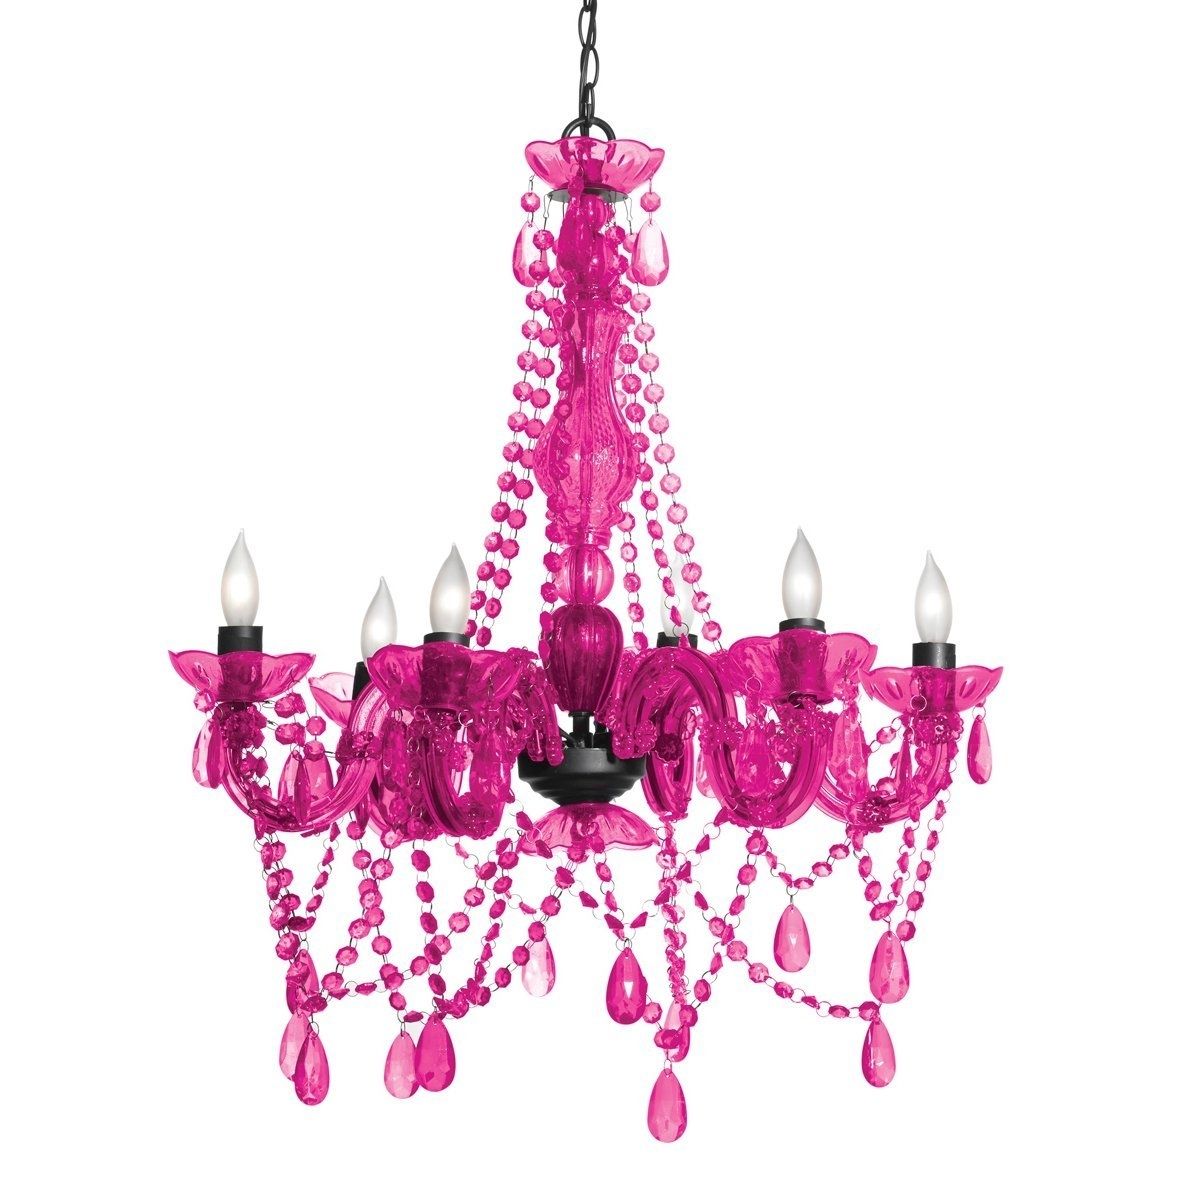 Affordable Chandeliers For Girls To Teens' Rooms Within Most Up To Date Funky Chandeliers (View 19 of 20)